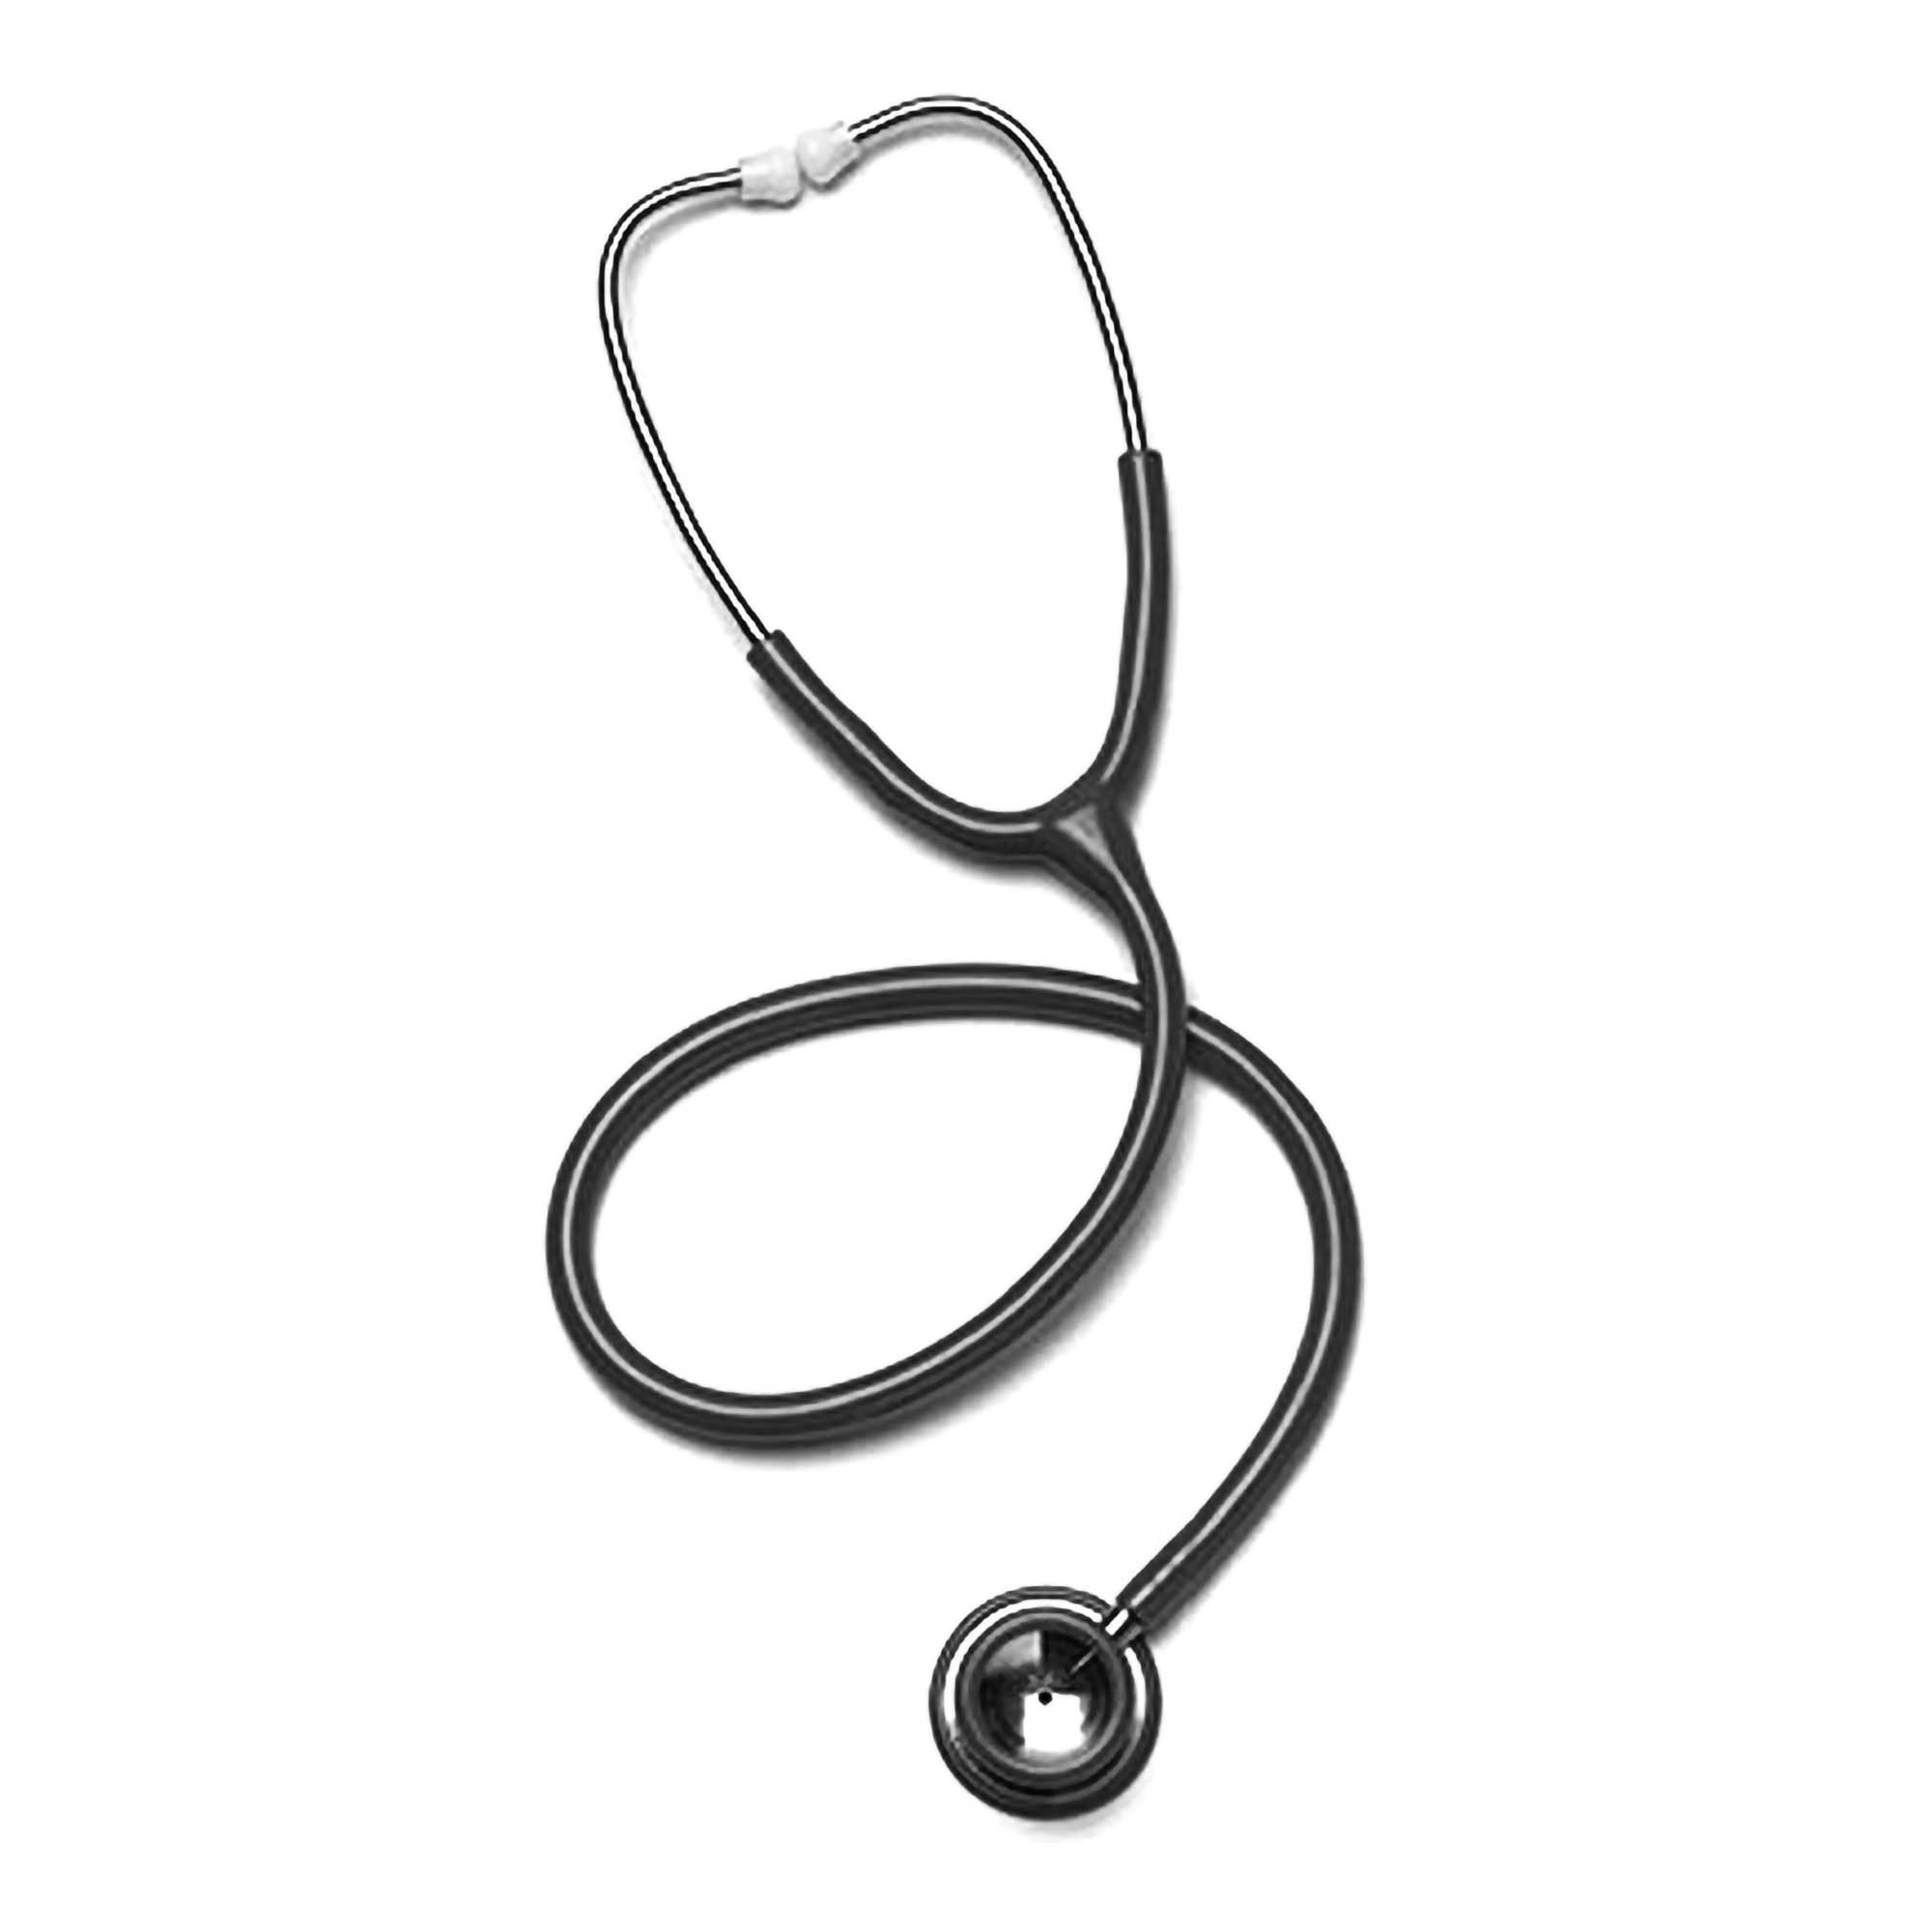 Clinician Stethoscope Sklar® Black 1-Tube 30 Inch Tube Double Sided Chestpiece